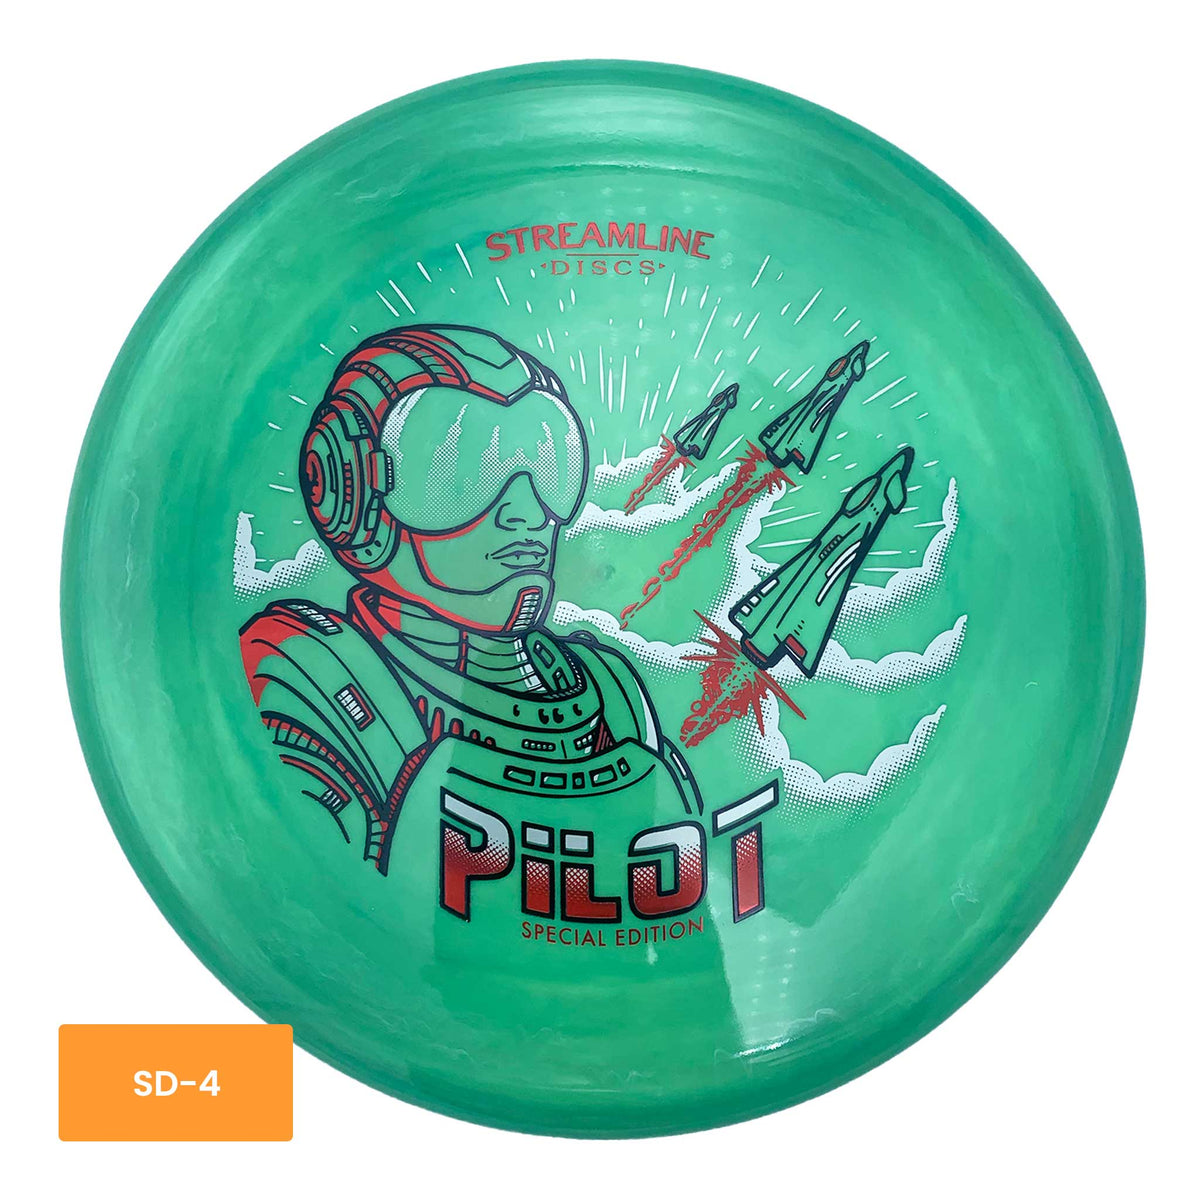 Streamline Discs Neutron Pilot Special Edition putter and approach - Photo ID SD-4